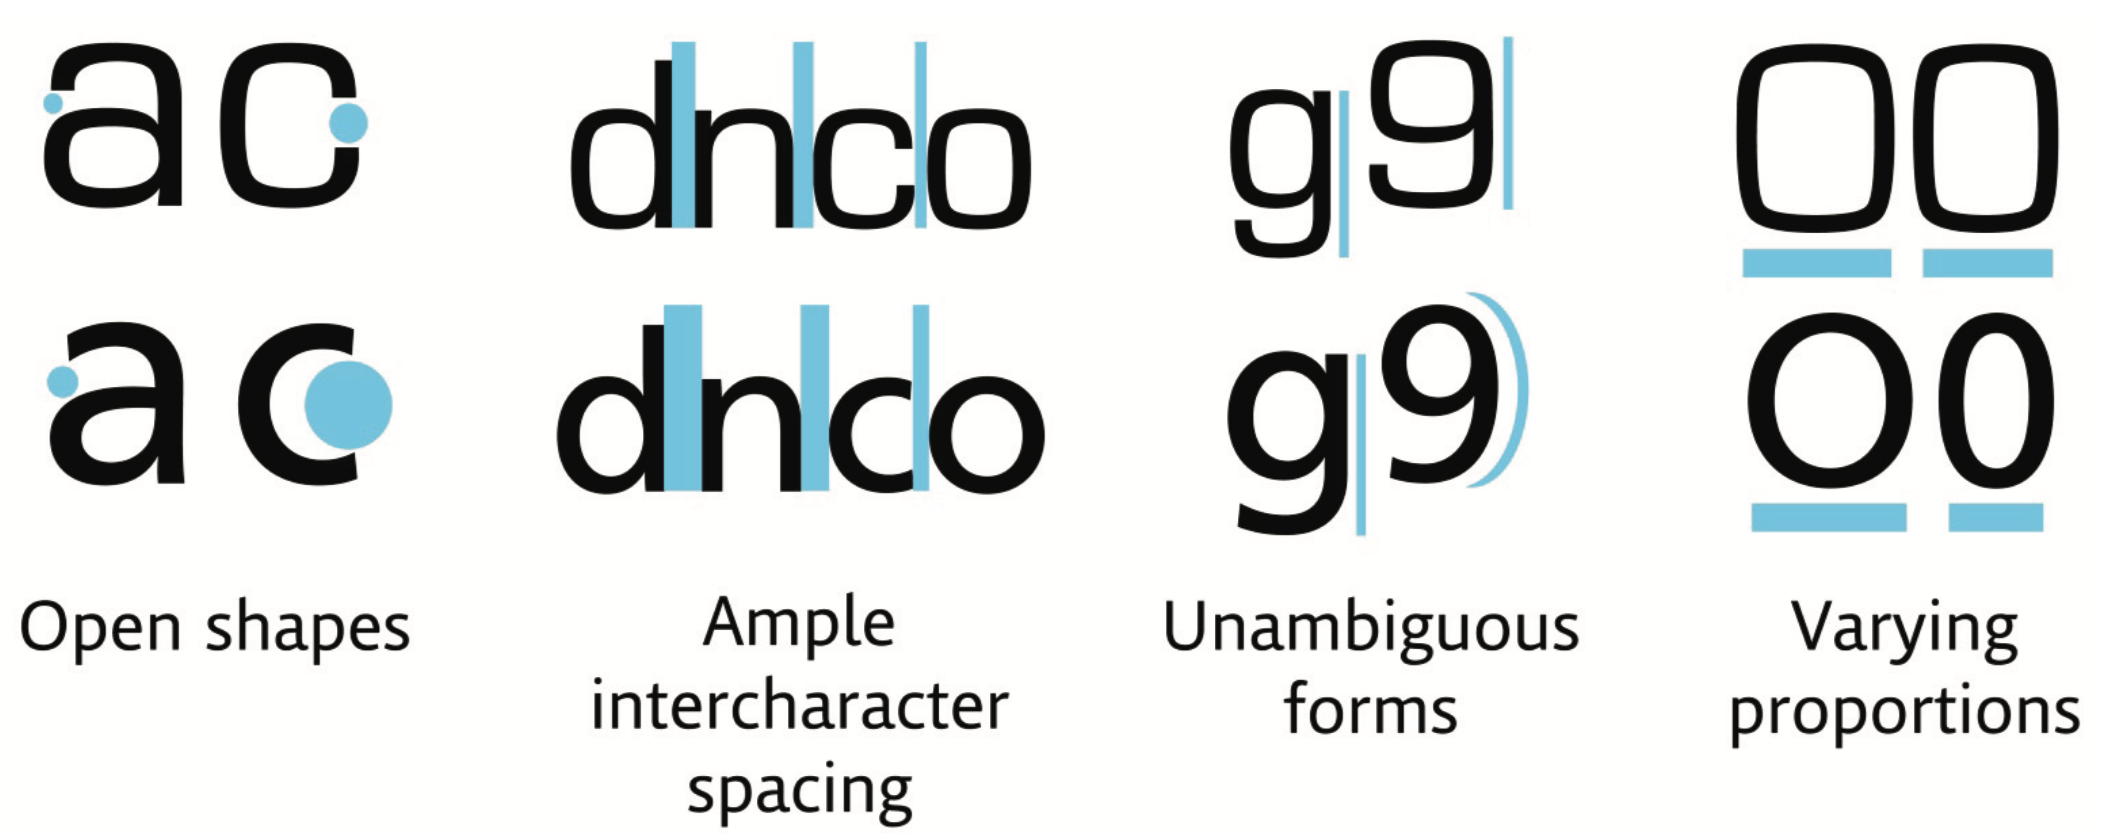 The top line of characters are a square grotesque design (Eurostile) and the bottom line a humanist design (Frutiger) highlighting various characteristics thought to improve legibility